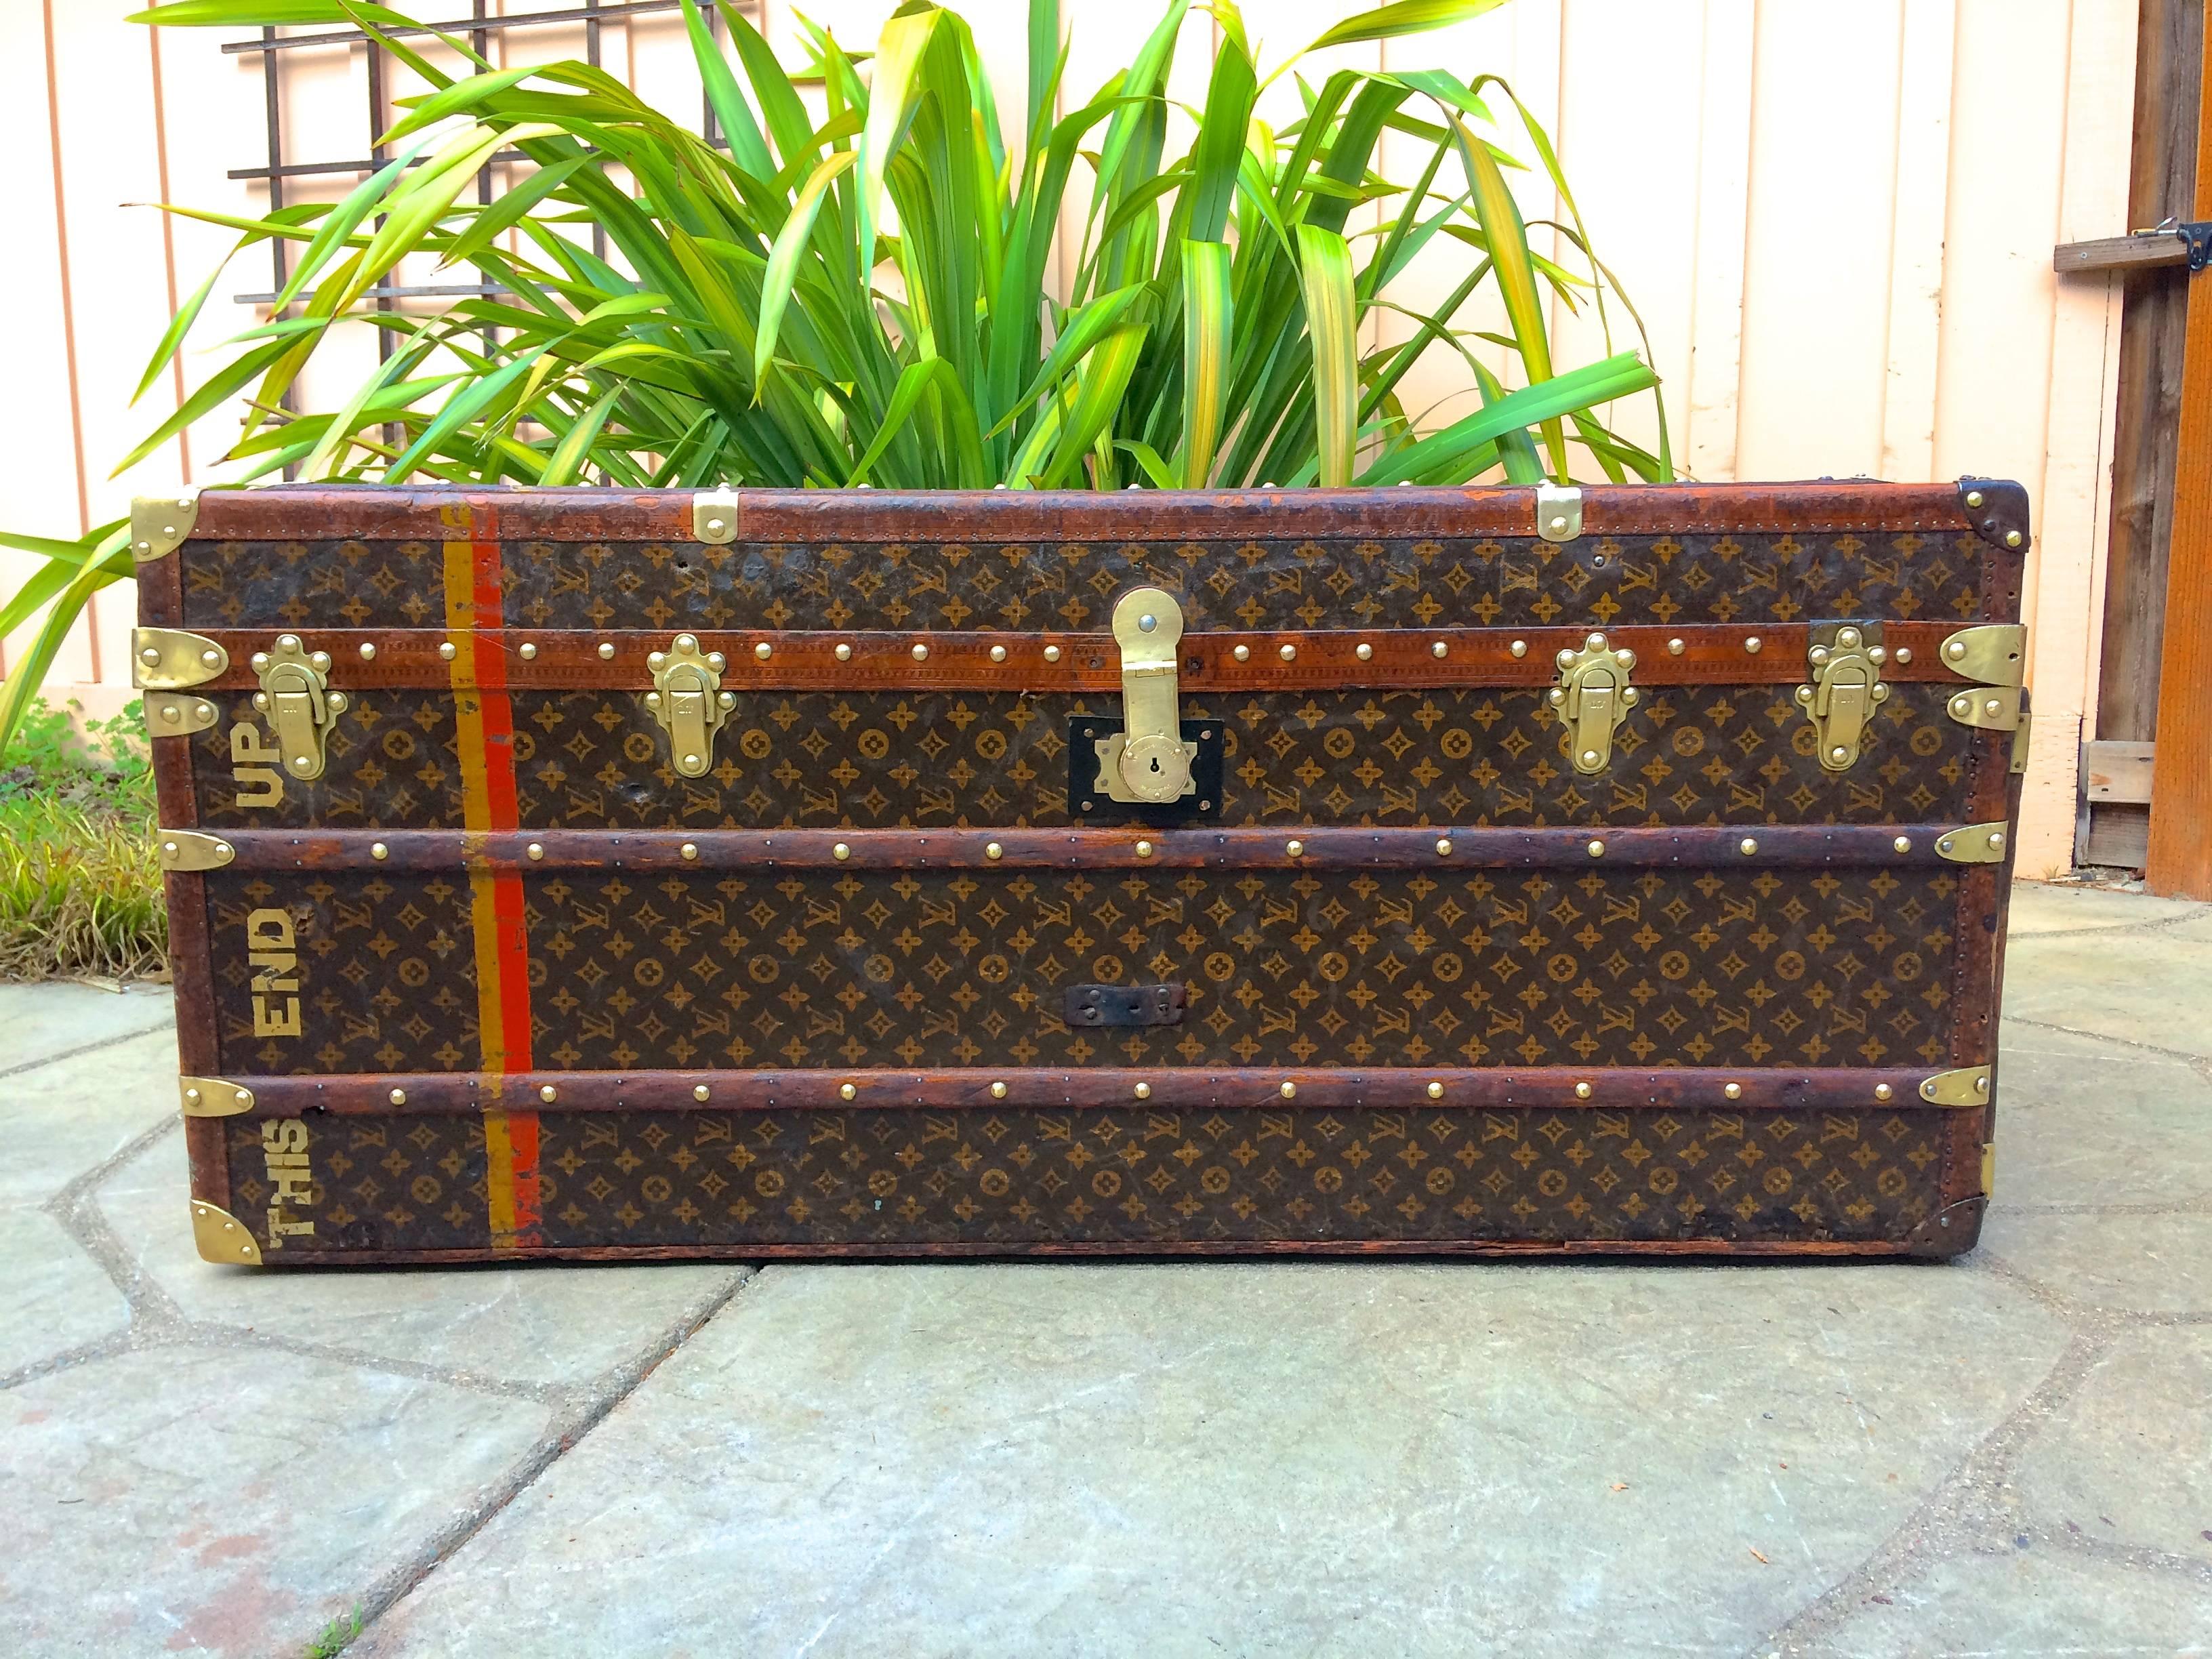 Antiquelarge Louis Vuitton Steamer Wardrobe Trunk Purse Bag Hermes Goyard Gucci In Excellent Condition For Sale In Carmel-by-the-sea, CA